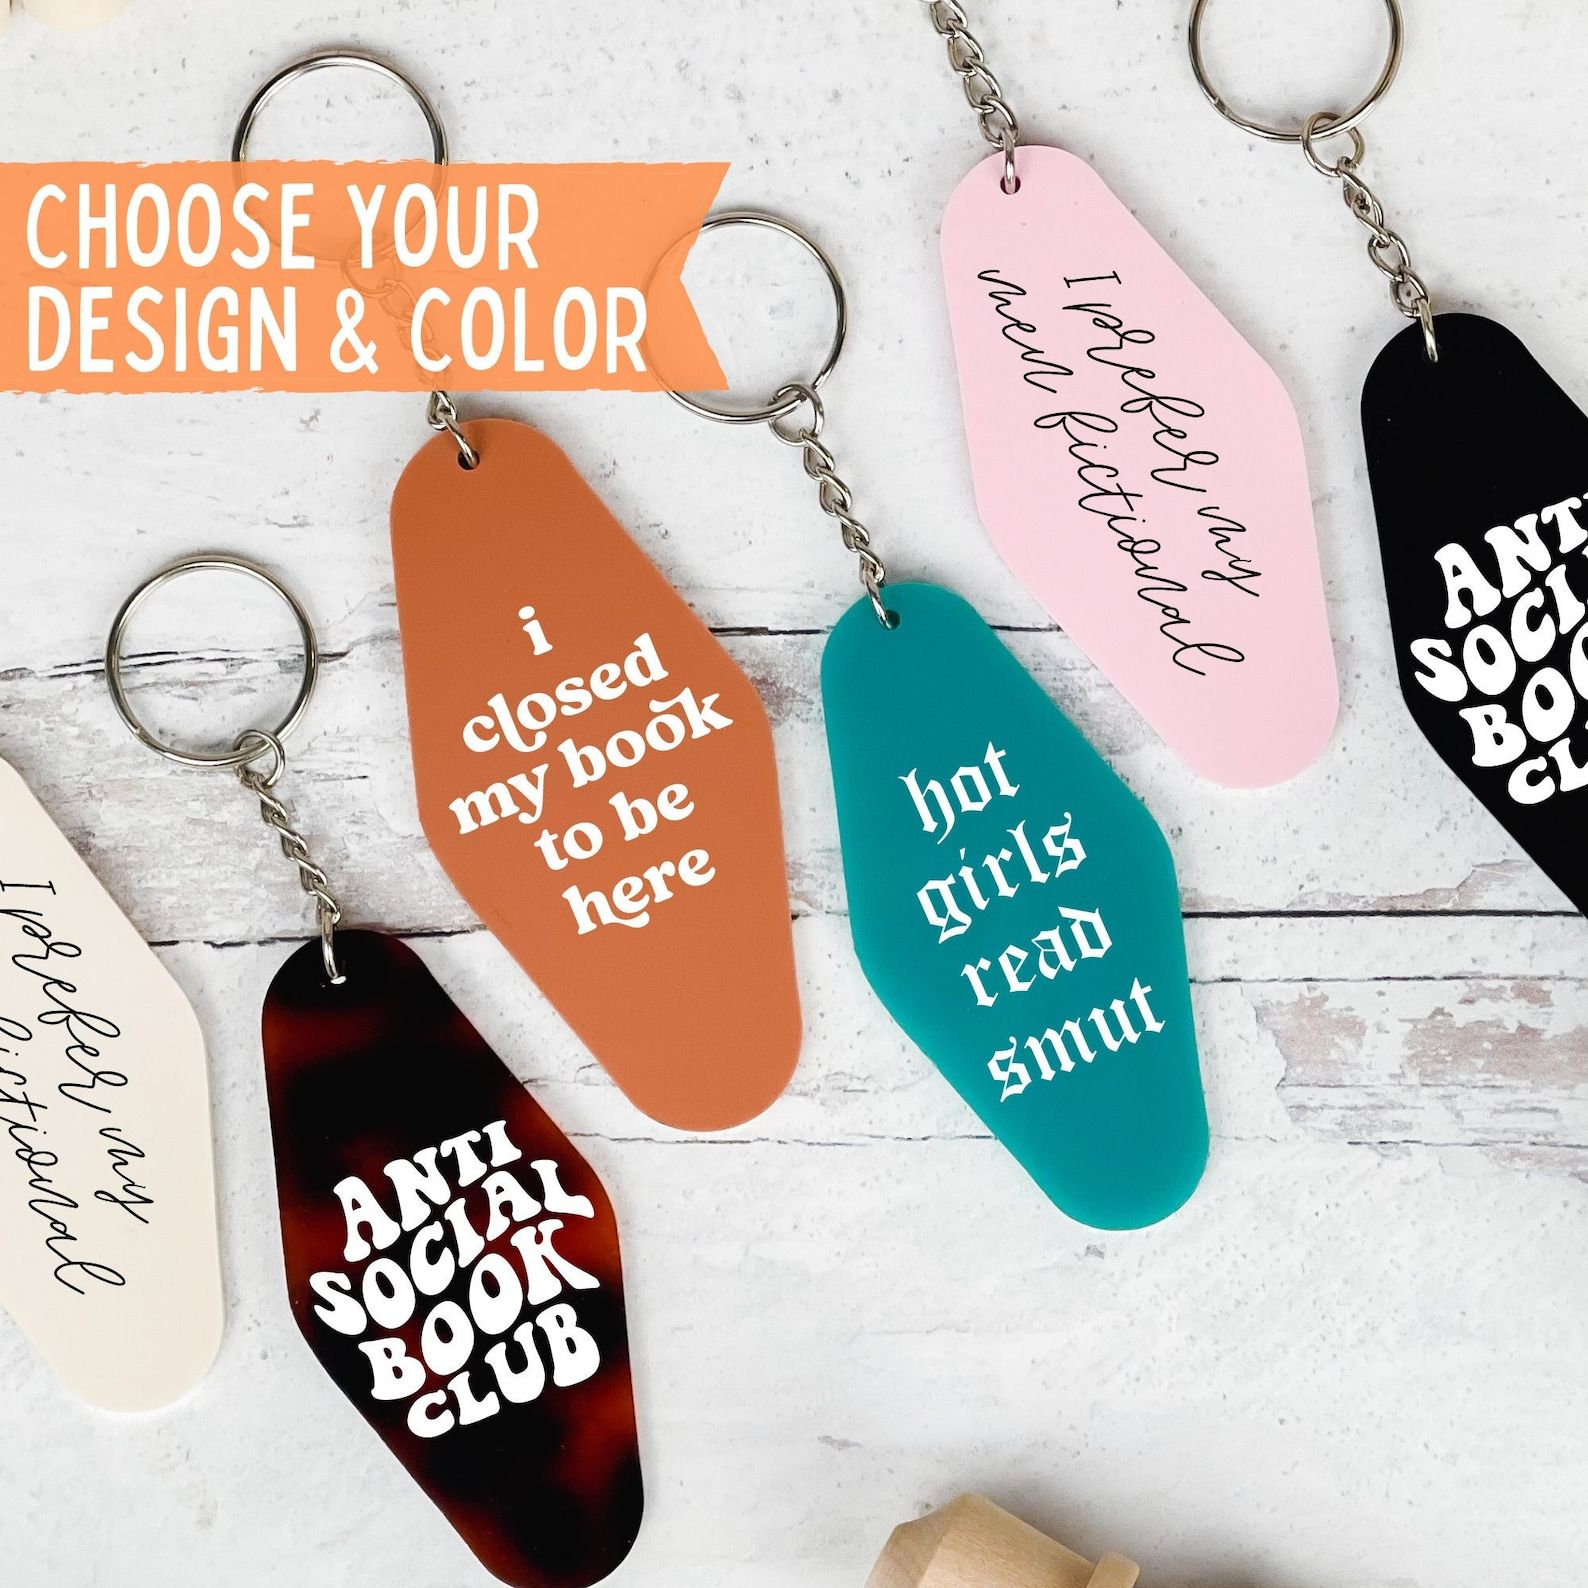 A set of various colored motel keychains with the words "I closed my book to be here" and "hot girls read smut"